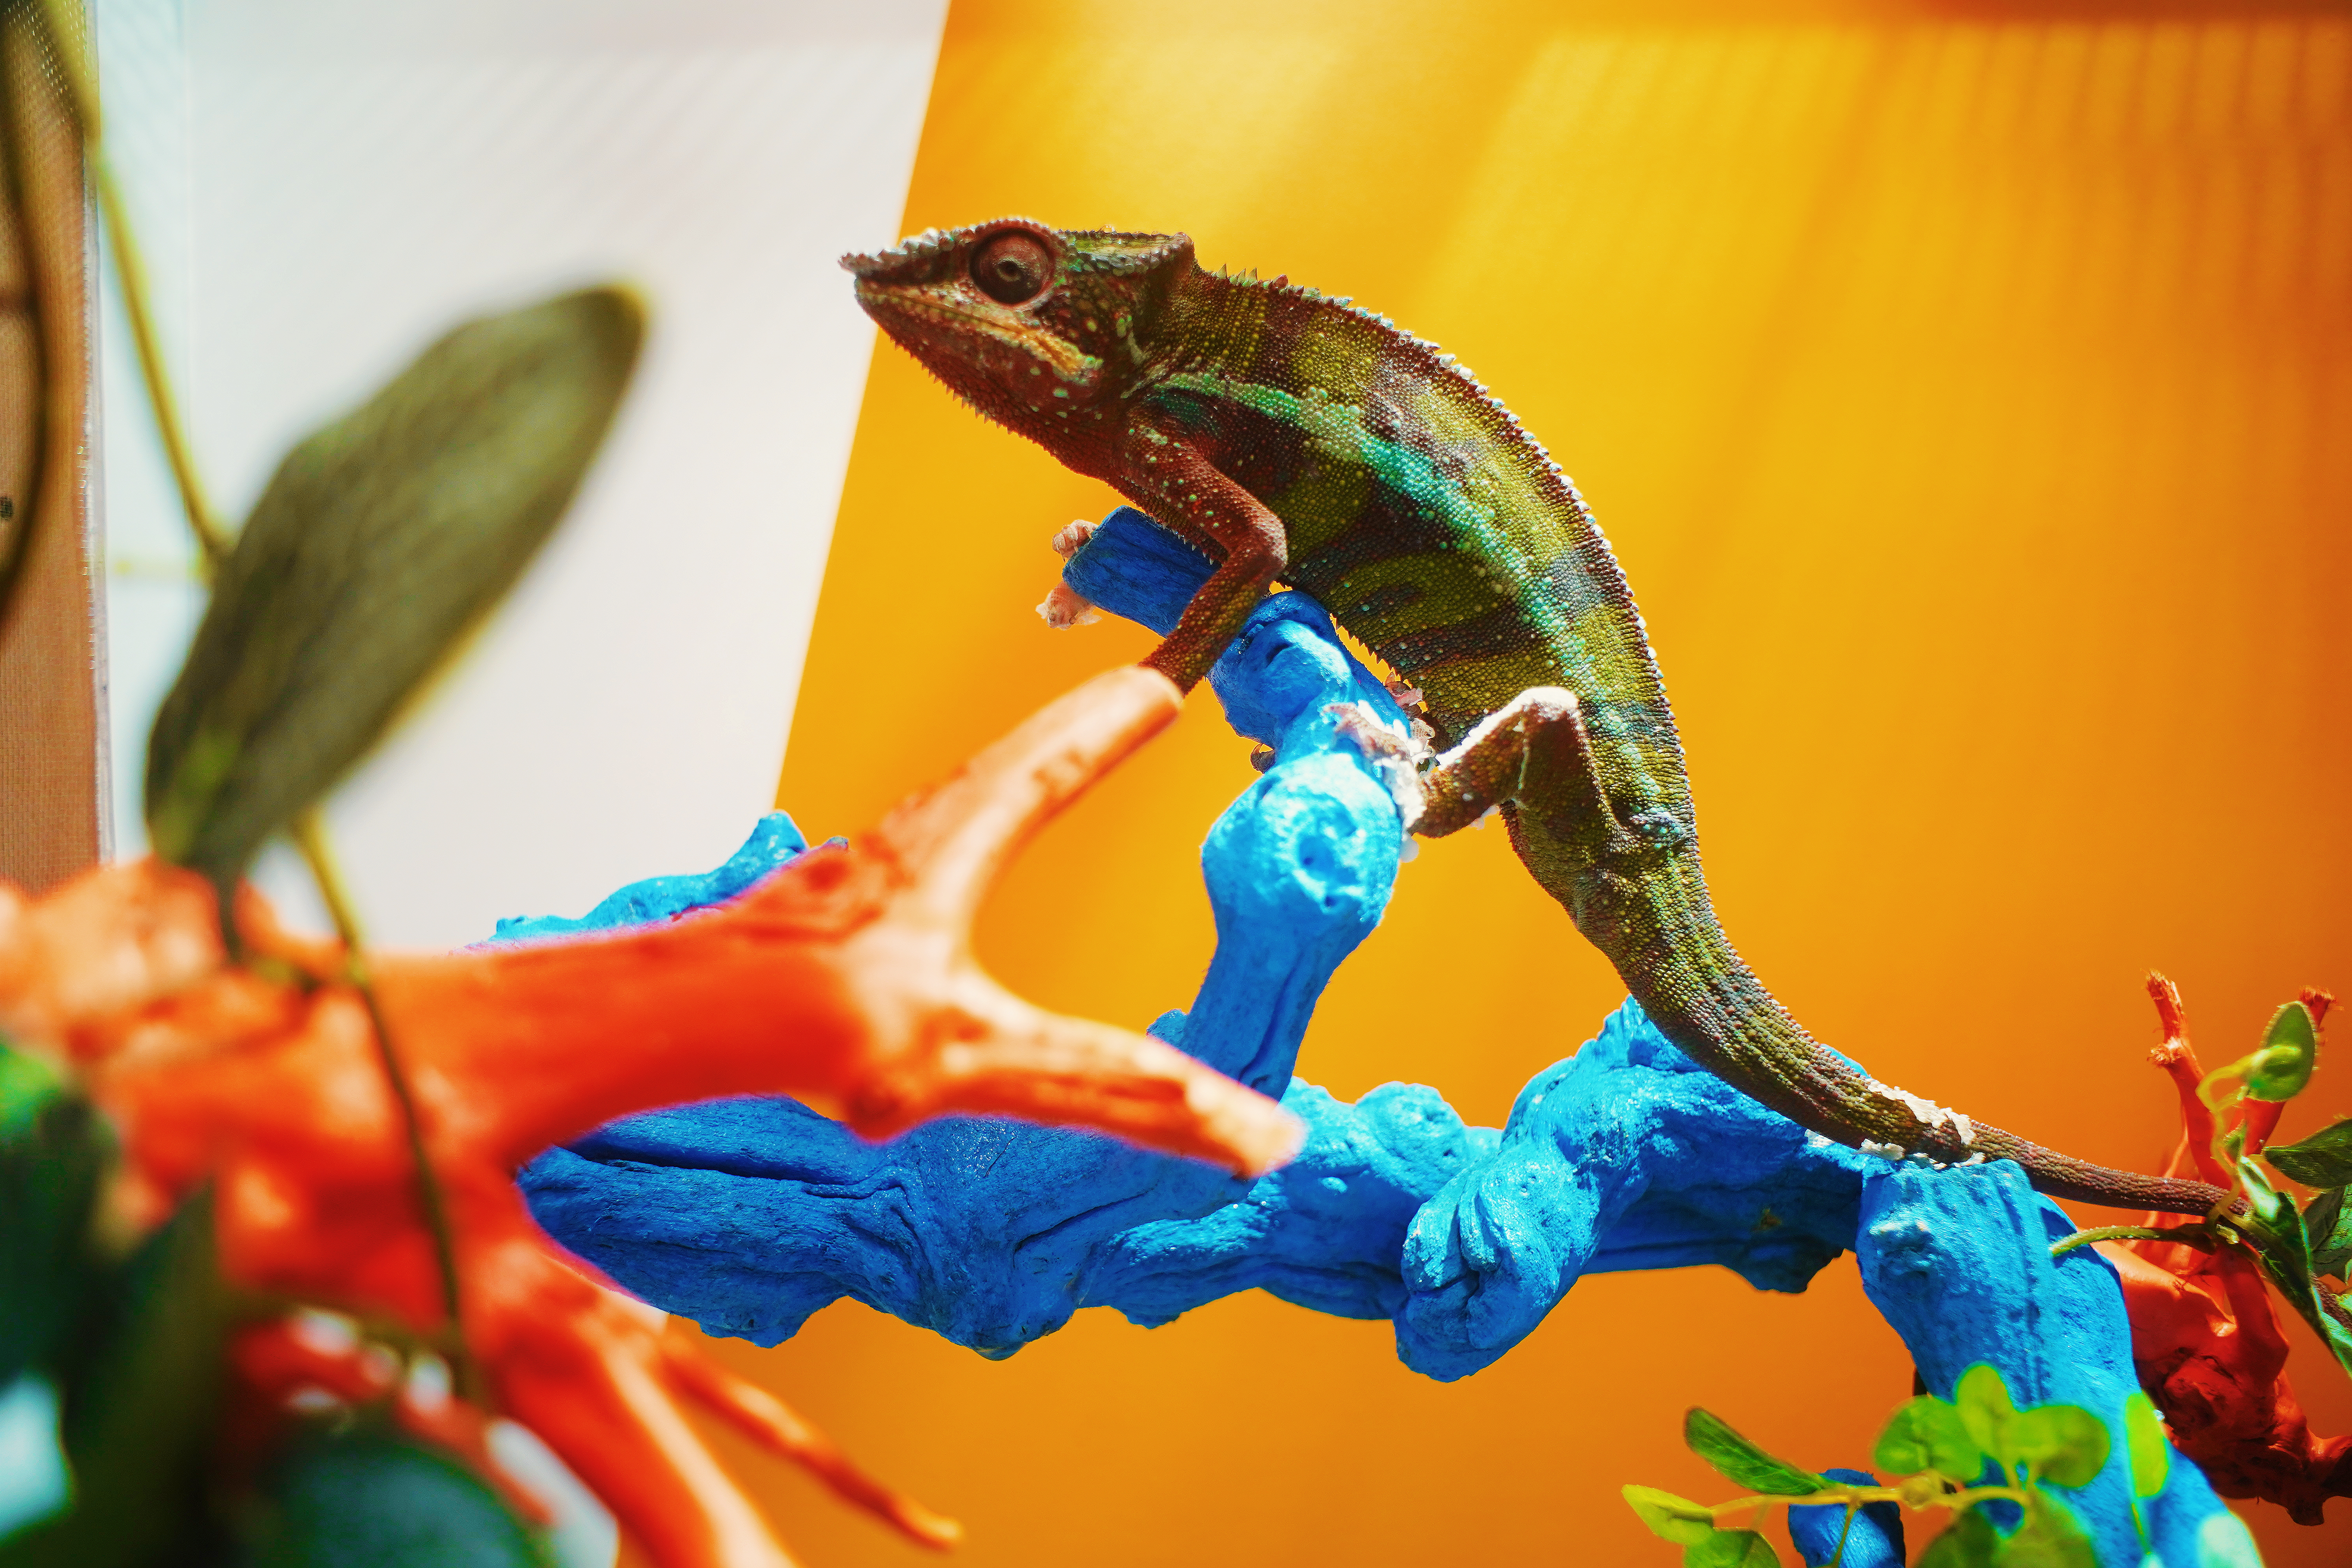 This photo is from Instagrammer Moronnon (photo by @moron_non). Panther Chameleon changes body color depending on mental state, so if you are lucky you may see a vivid figure!